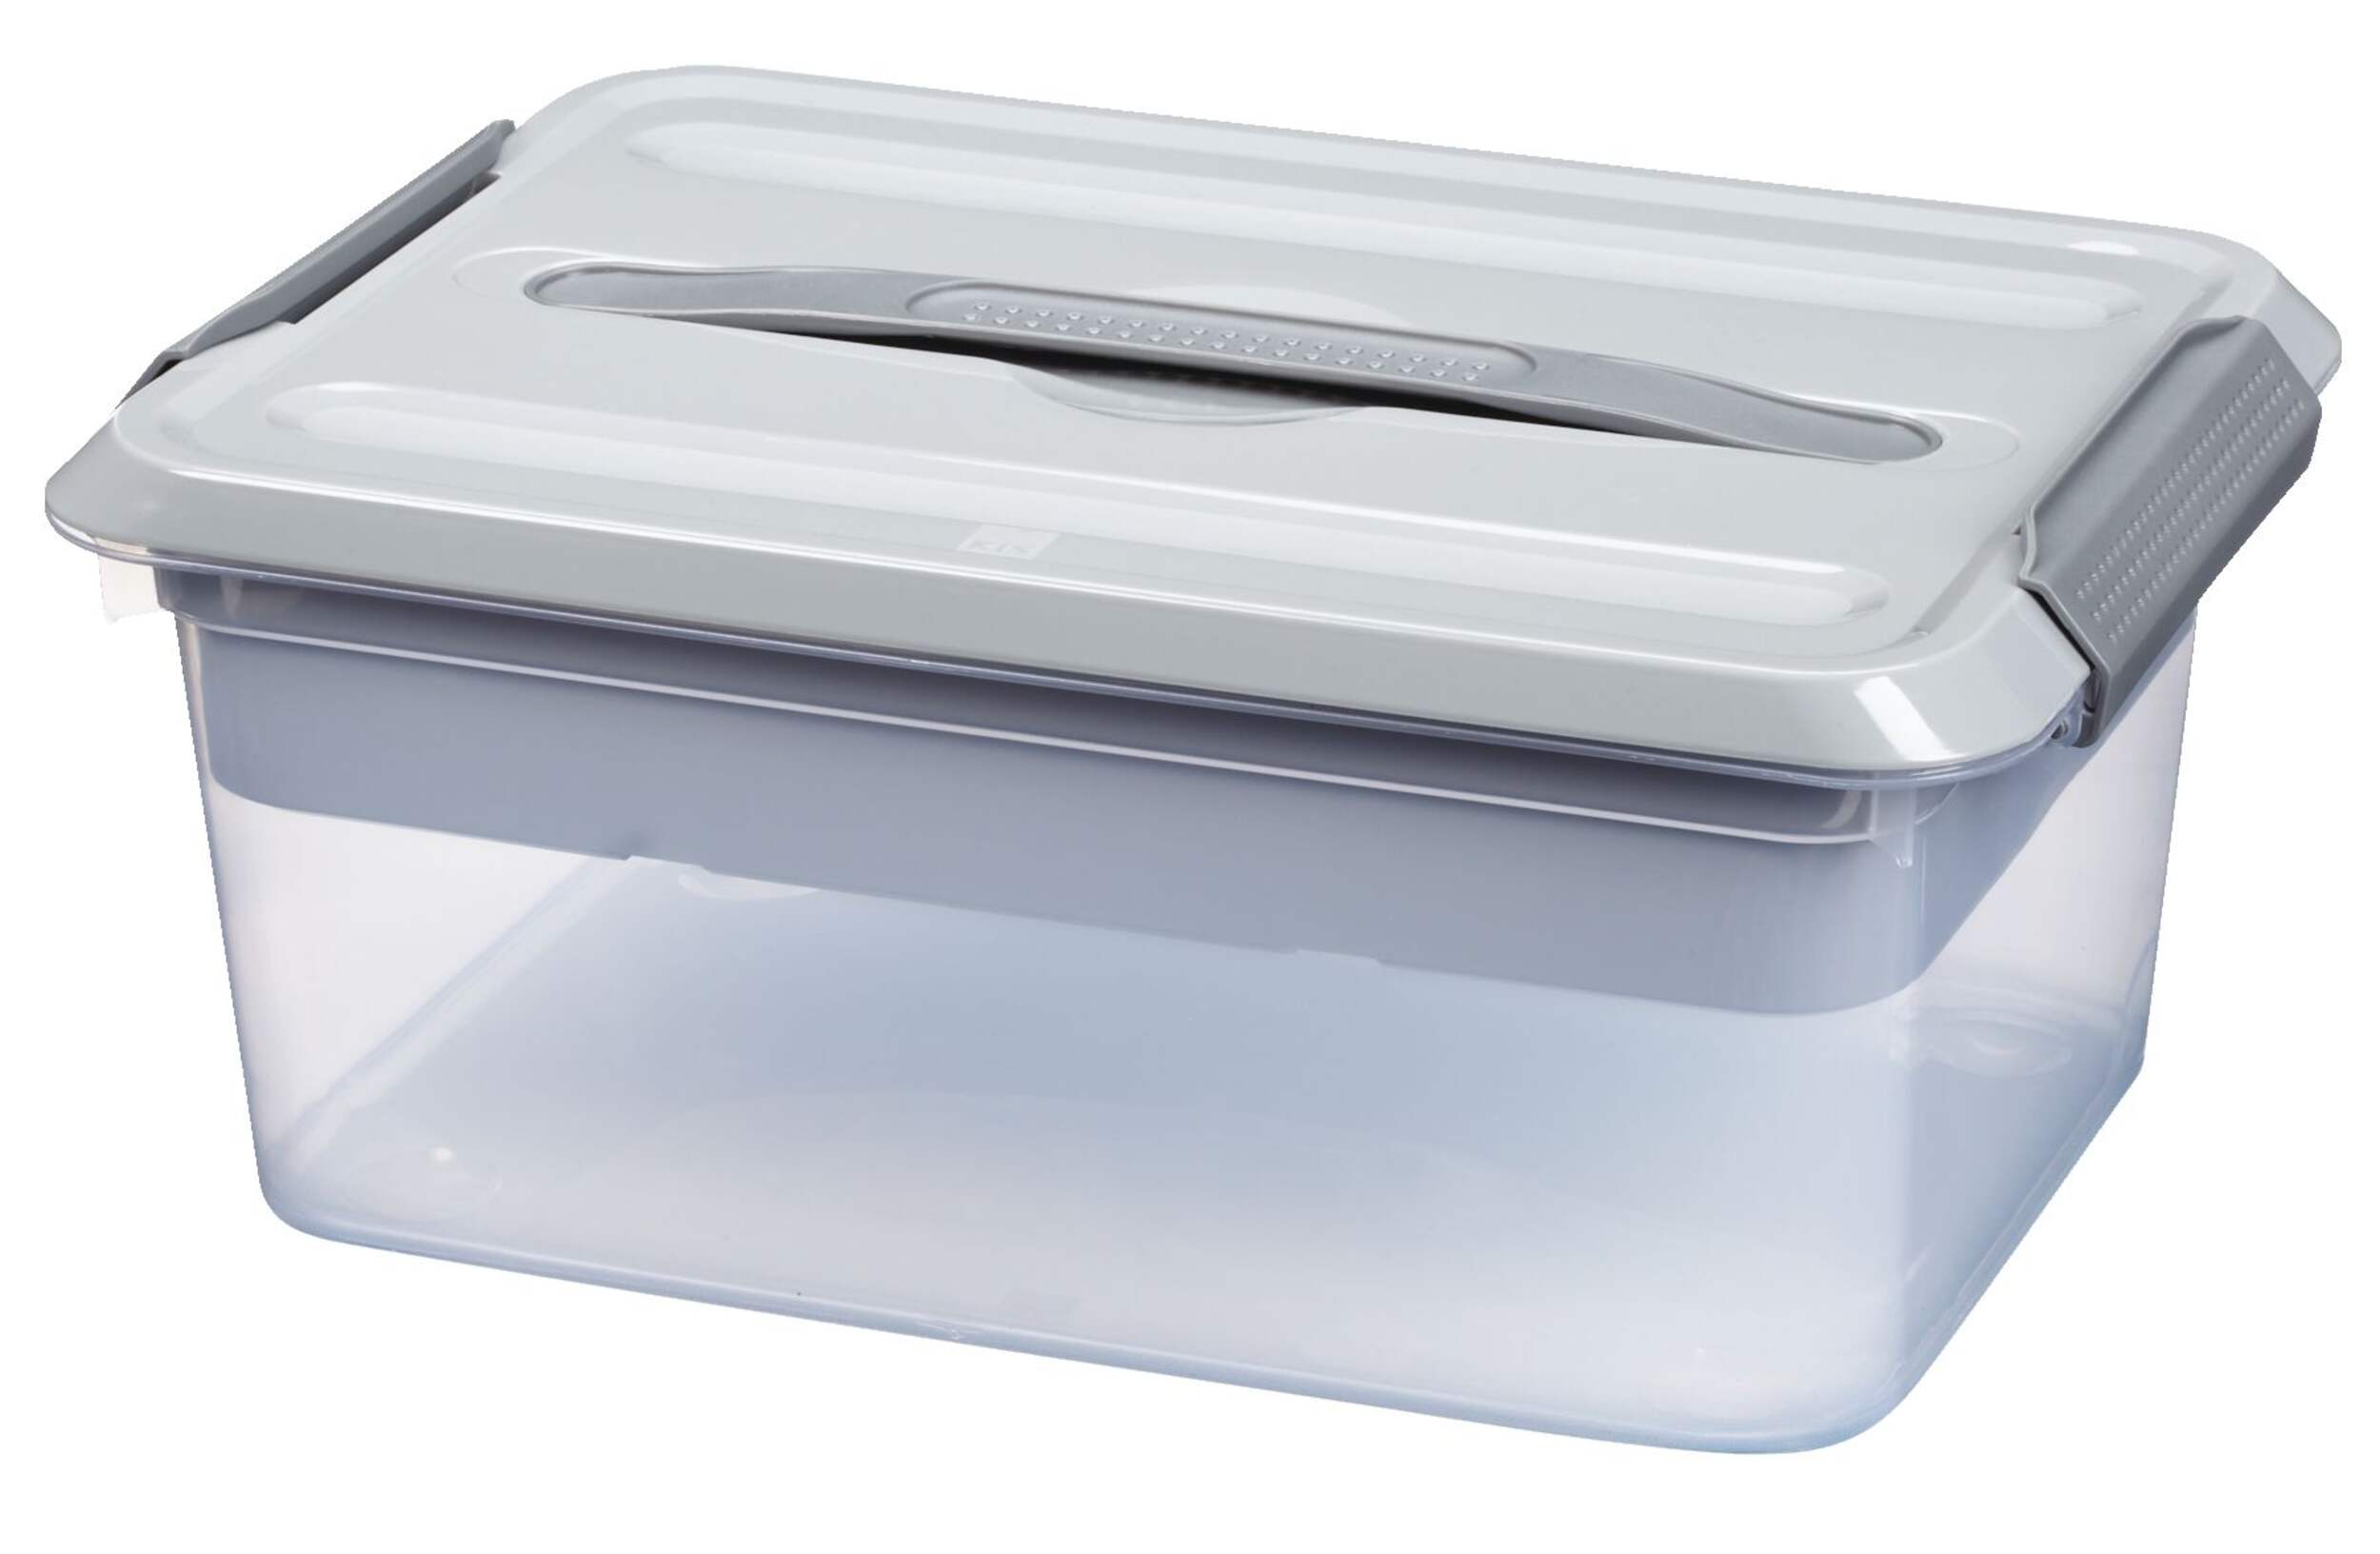 type A Transparent Storage Box with Latched Lid, Divider Tray and ...